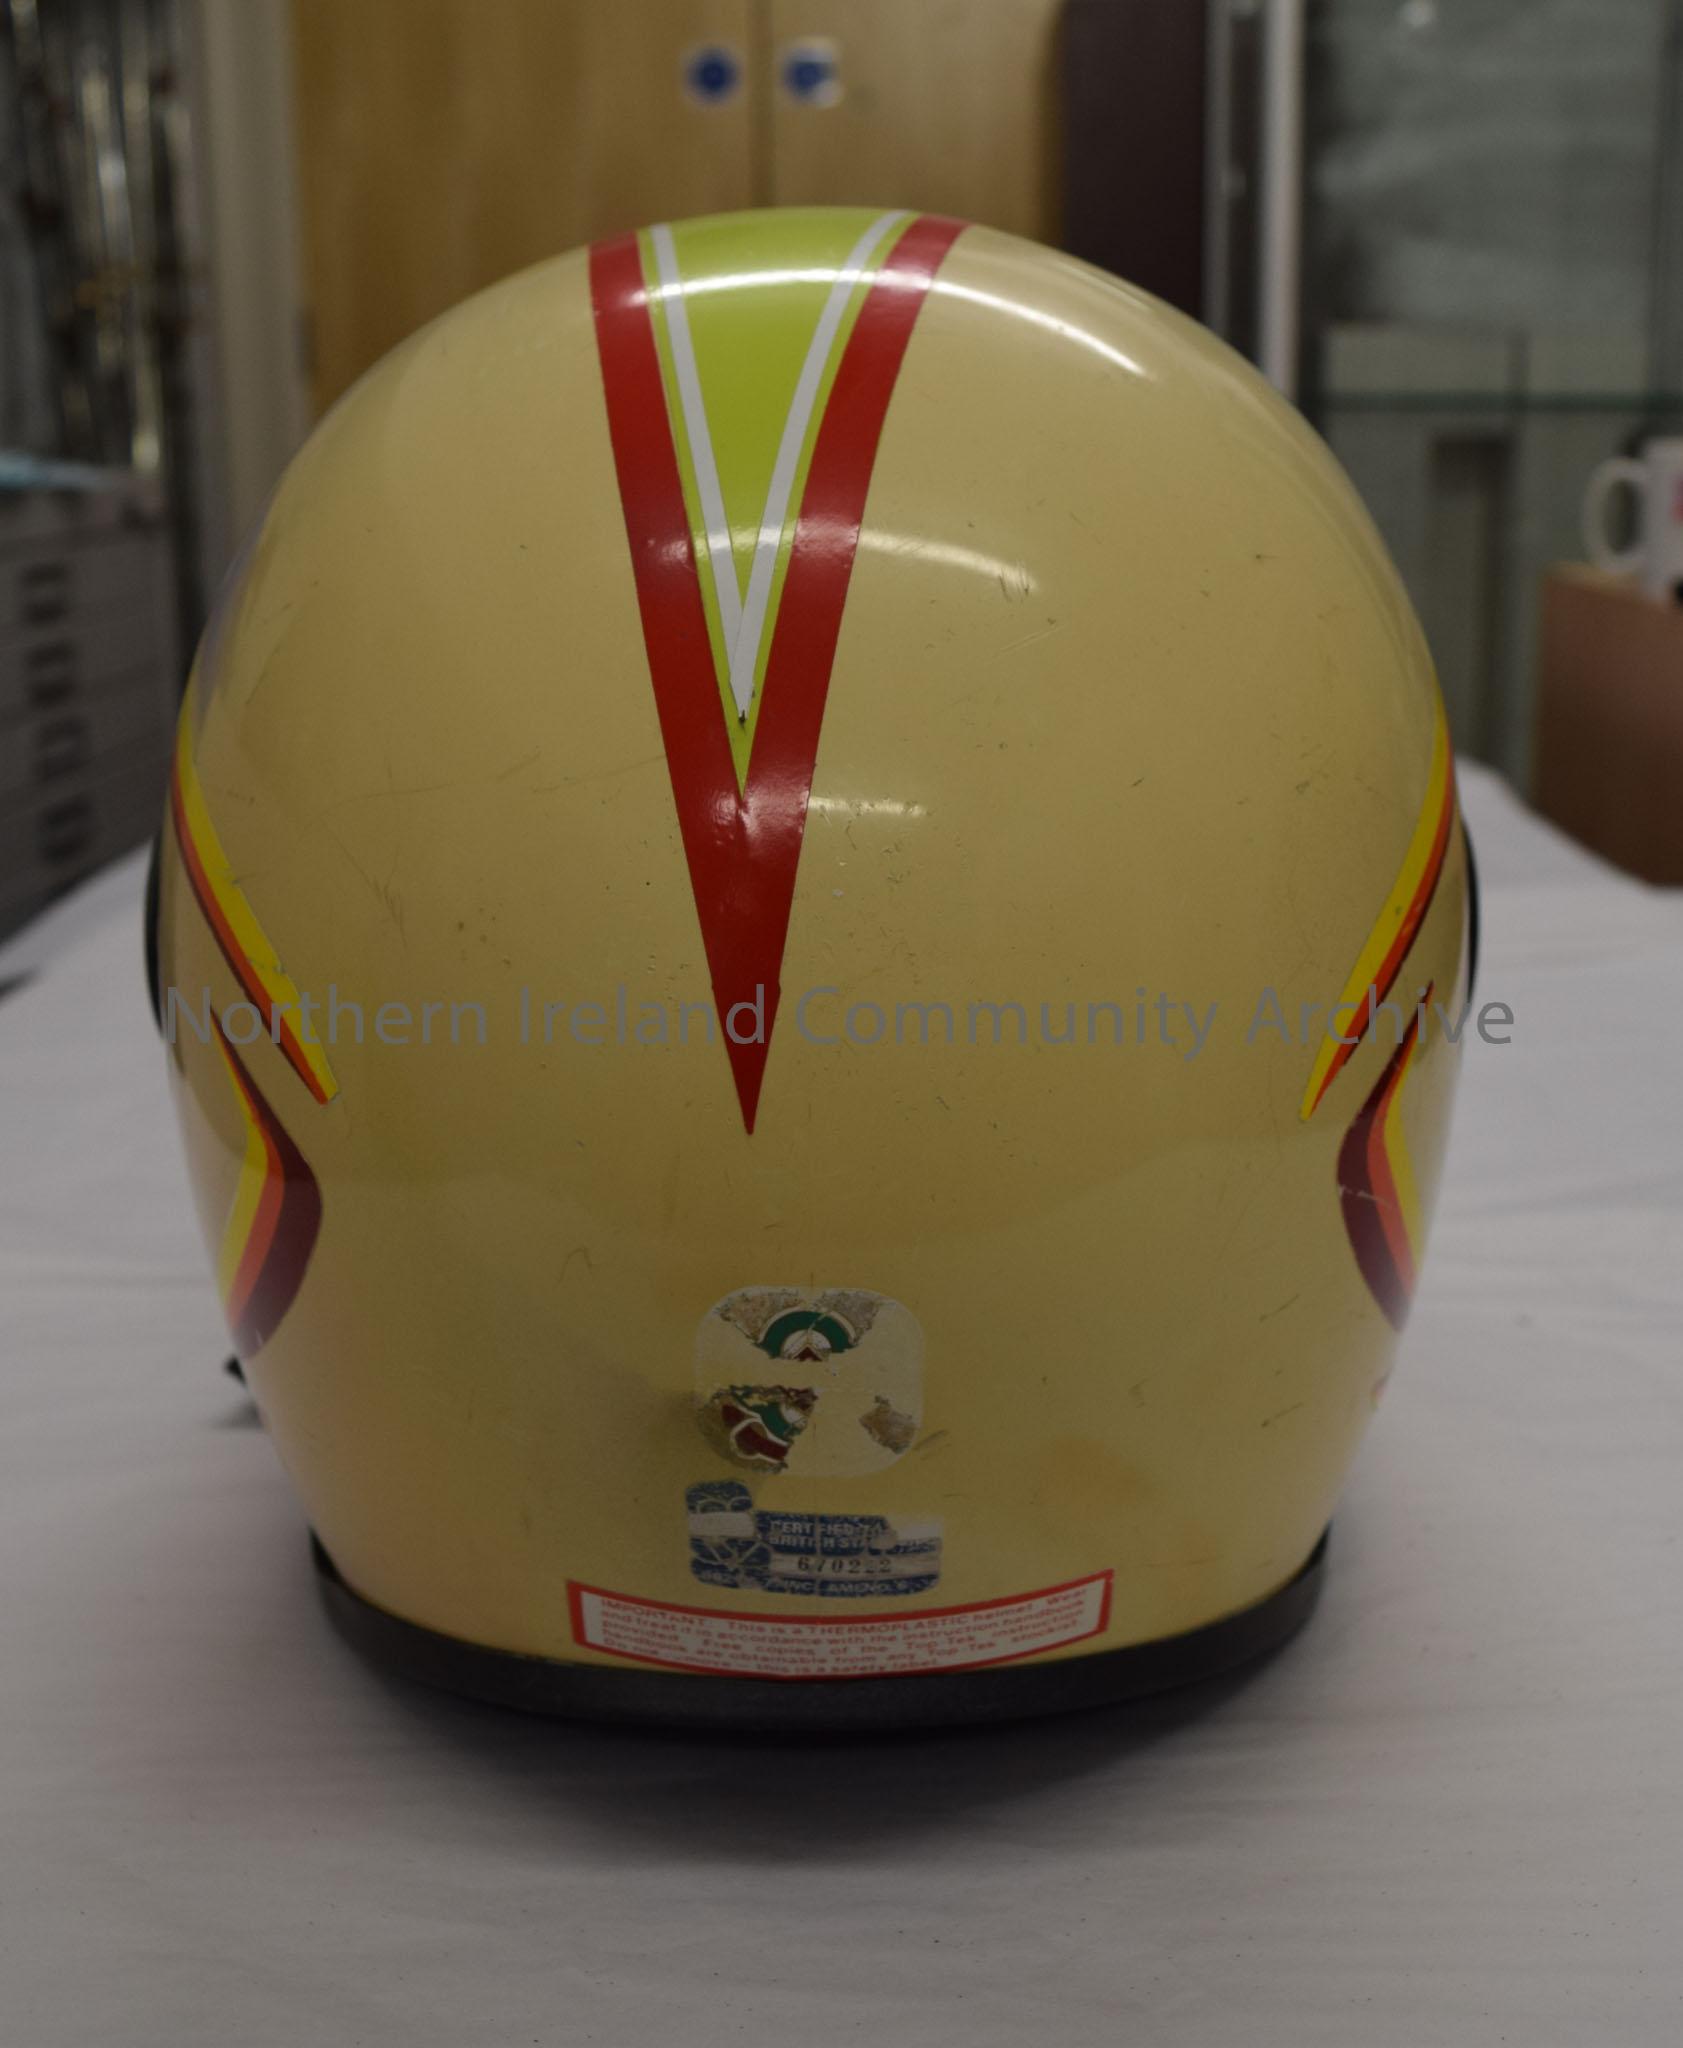 Top Tek motorcycle helmet. Cream with green/yellow stripe down the middle with a red border and red T in the centre. Yellow, red and burgundy stripes … – 2016.10 (4)